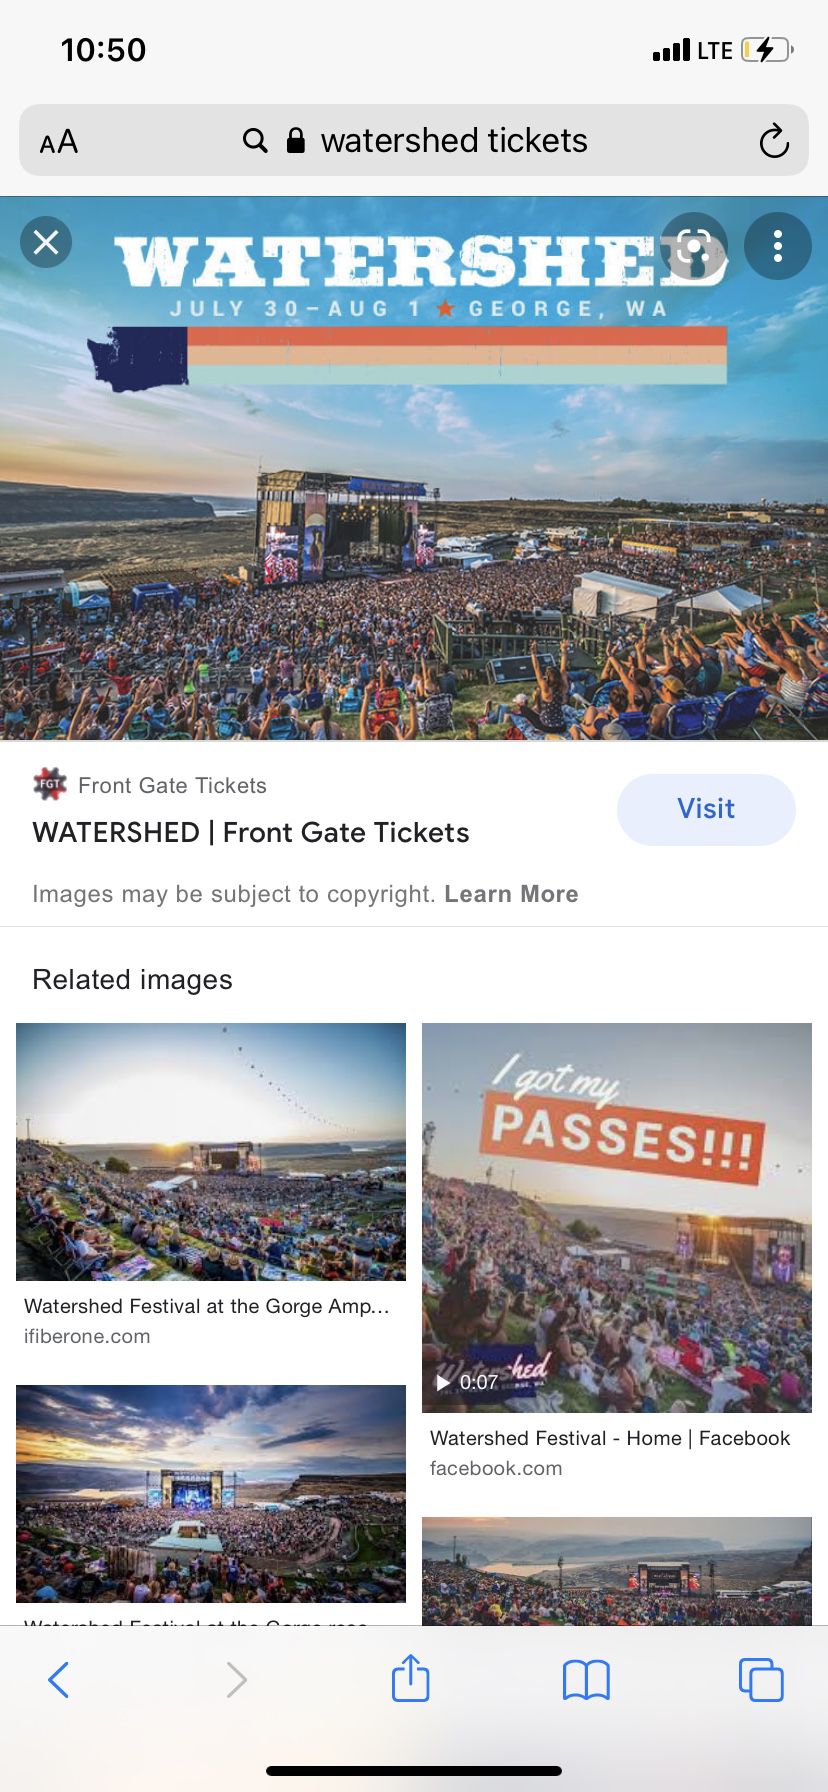 GORGE WATERSHED FESTIVAL, 2 GENERAL ADMISSION TICKETS